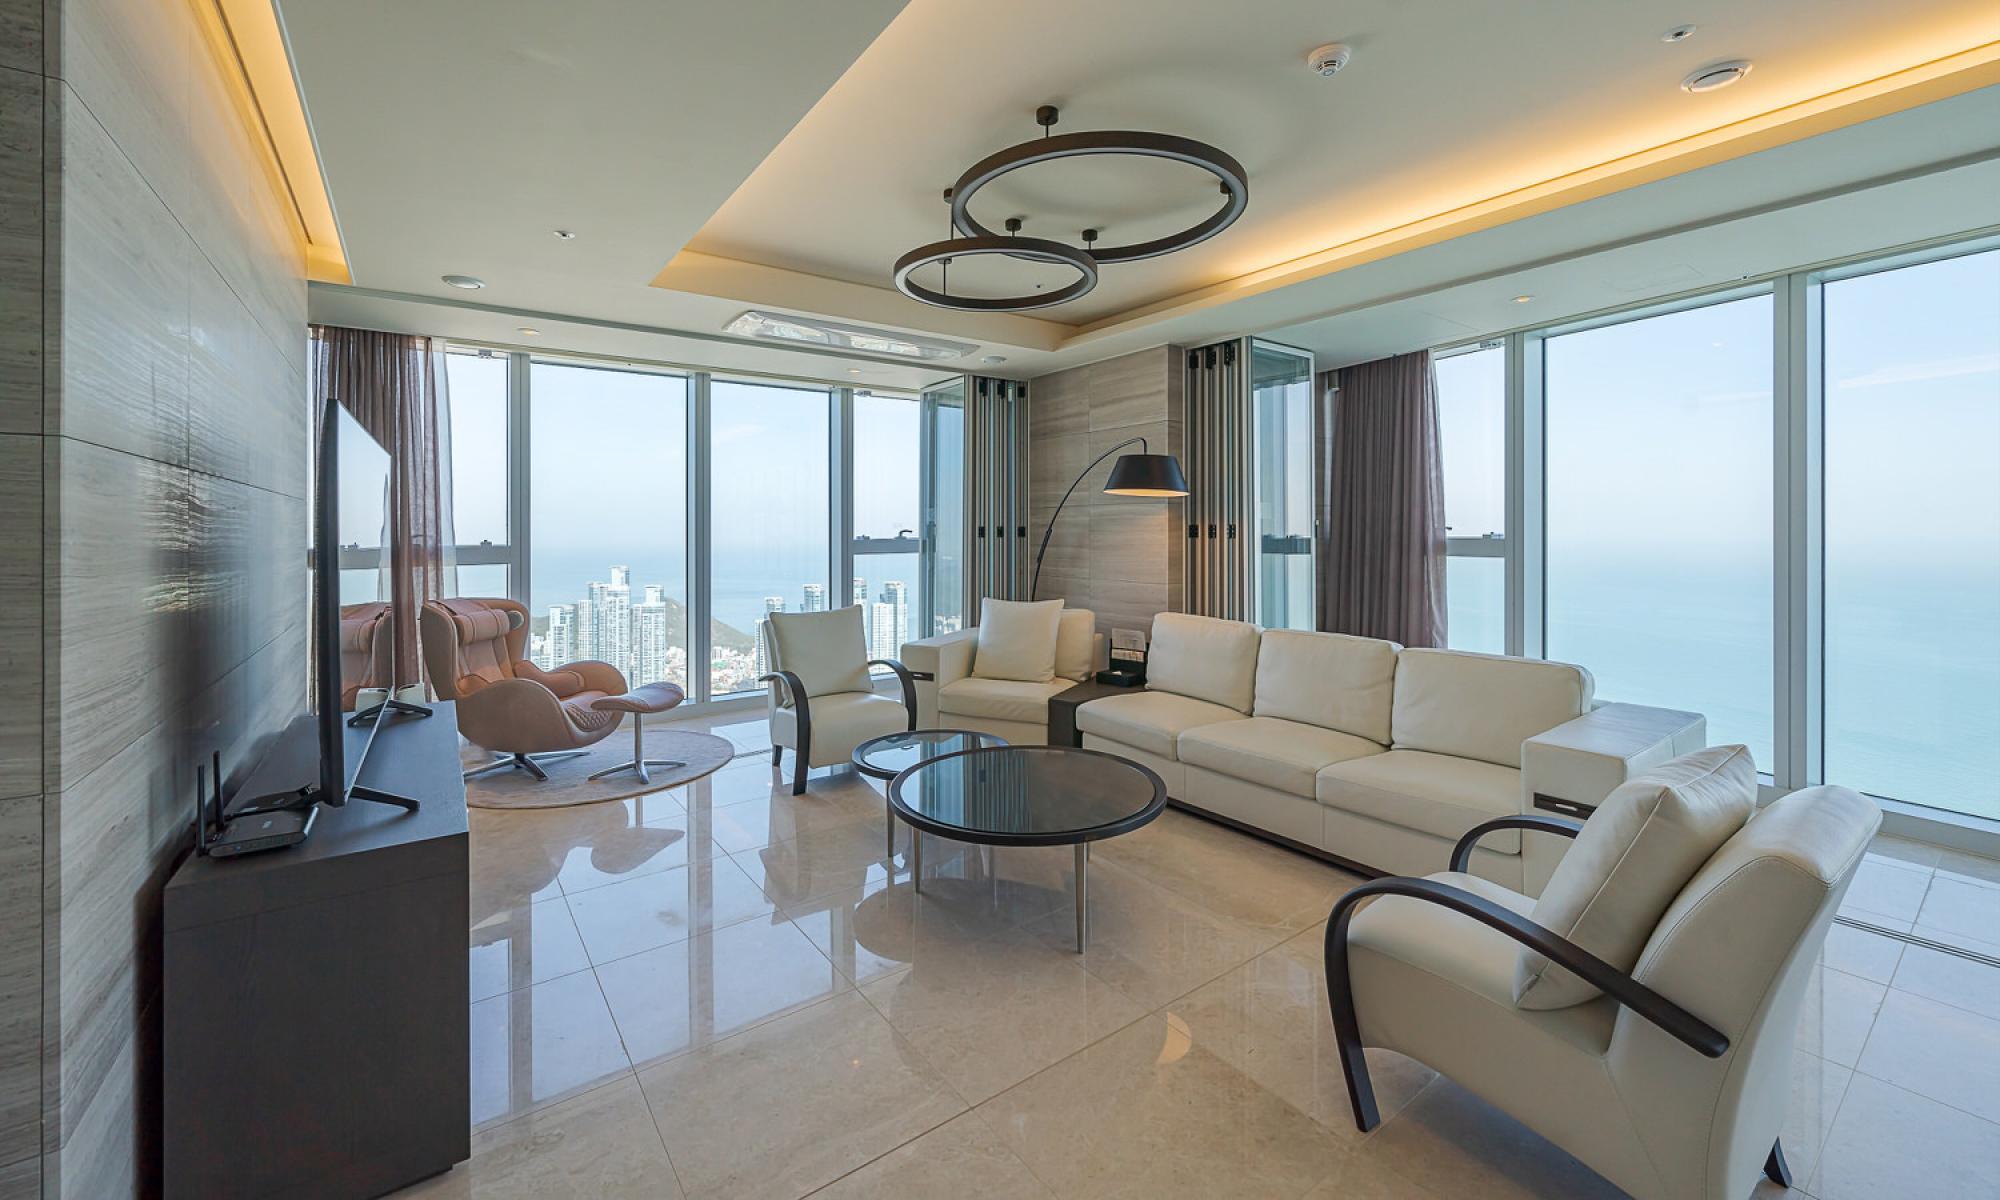 Property Image 1 - Contemporary Suite with Panoramic Ocean View